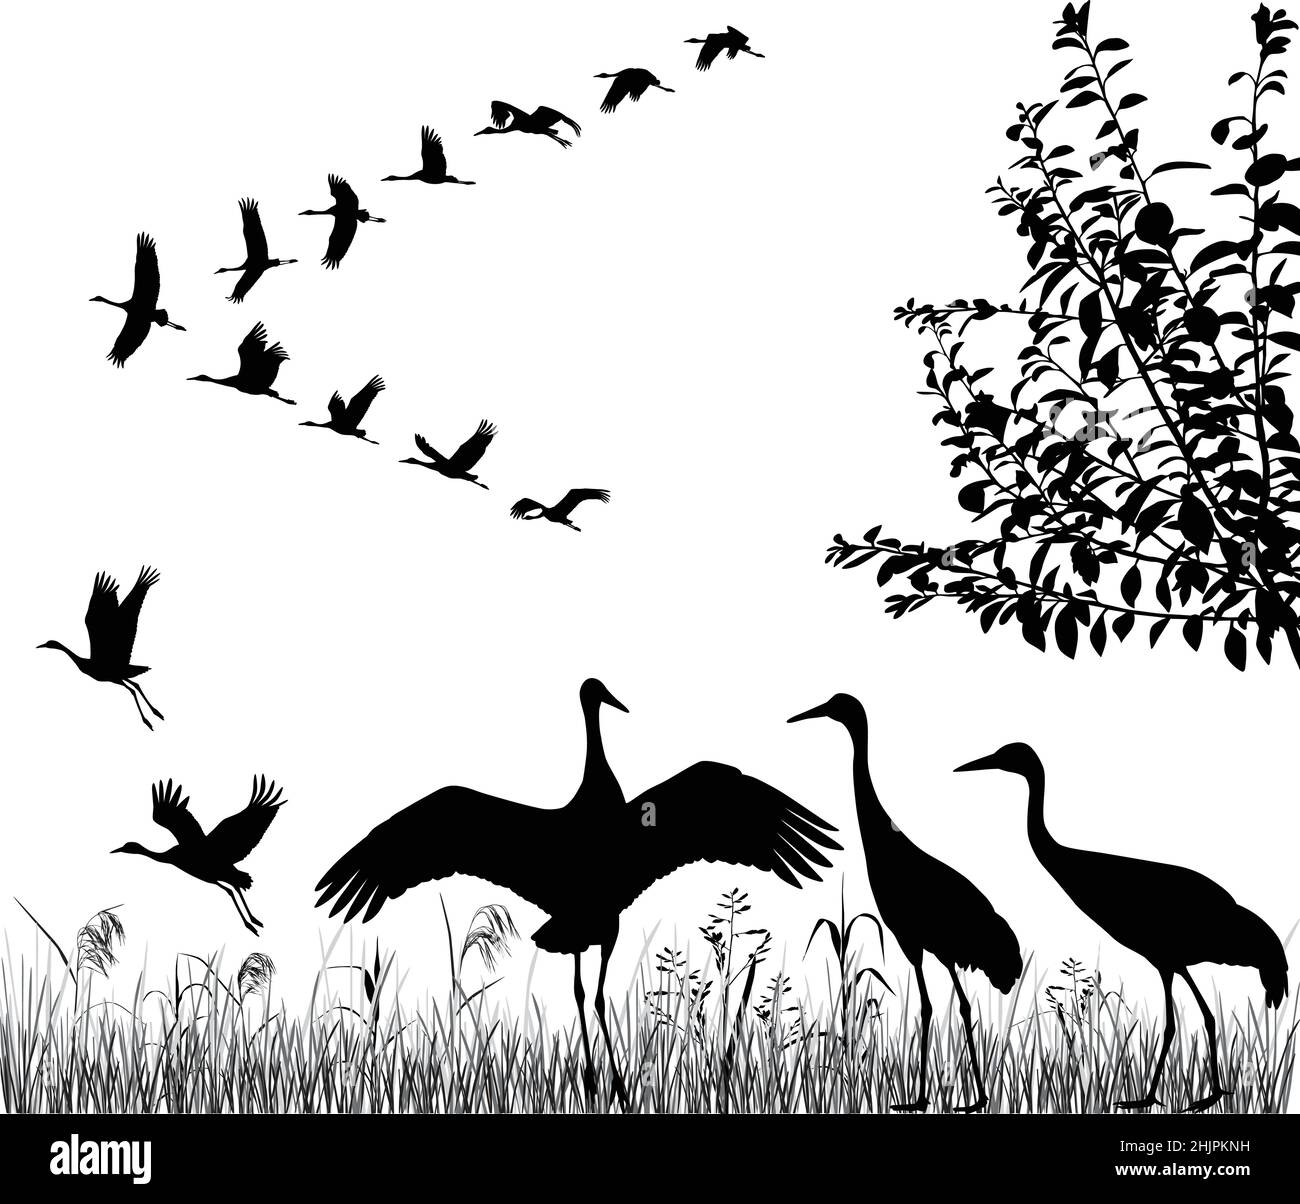 Silhouettes of the flying cranes in flock Stock Vector